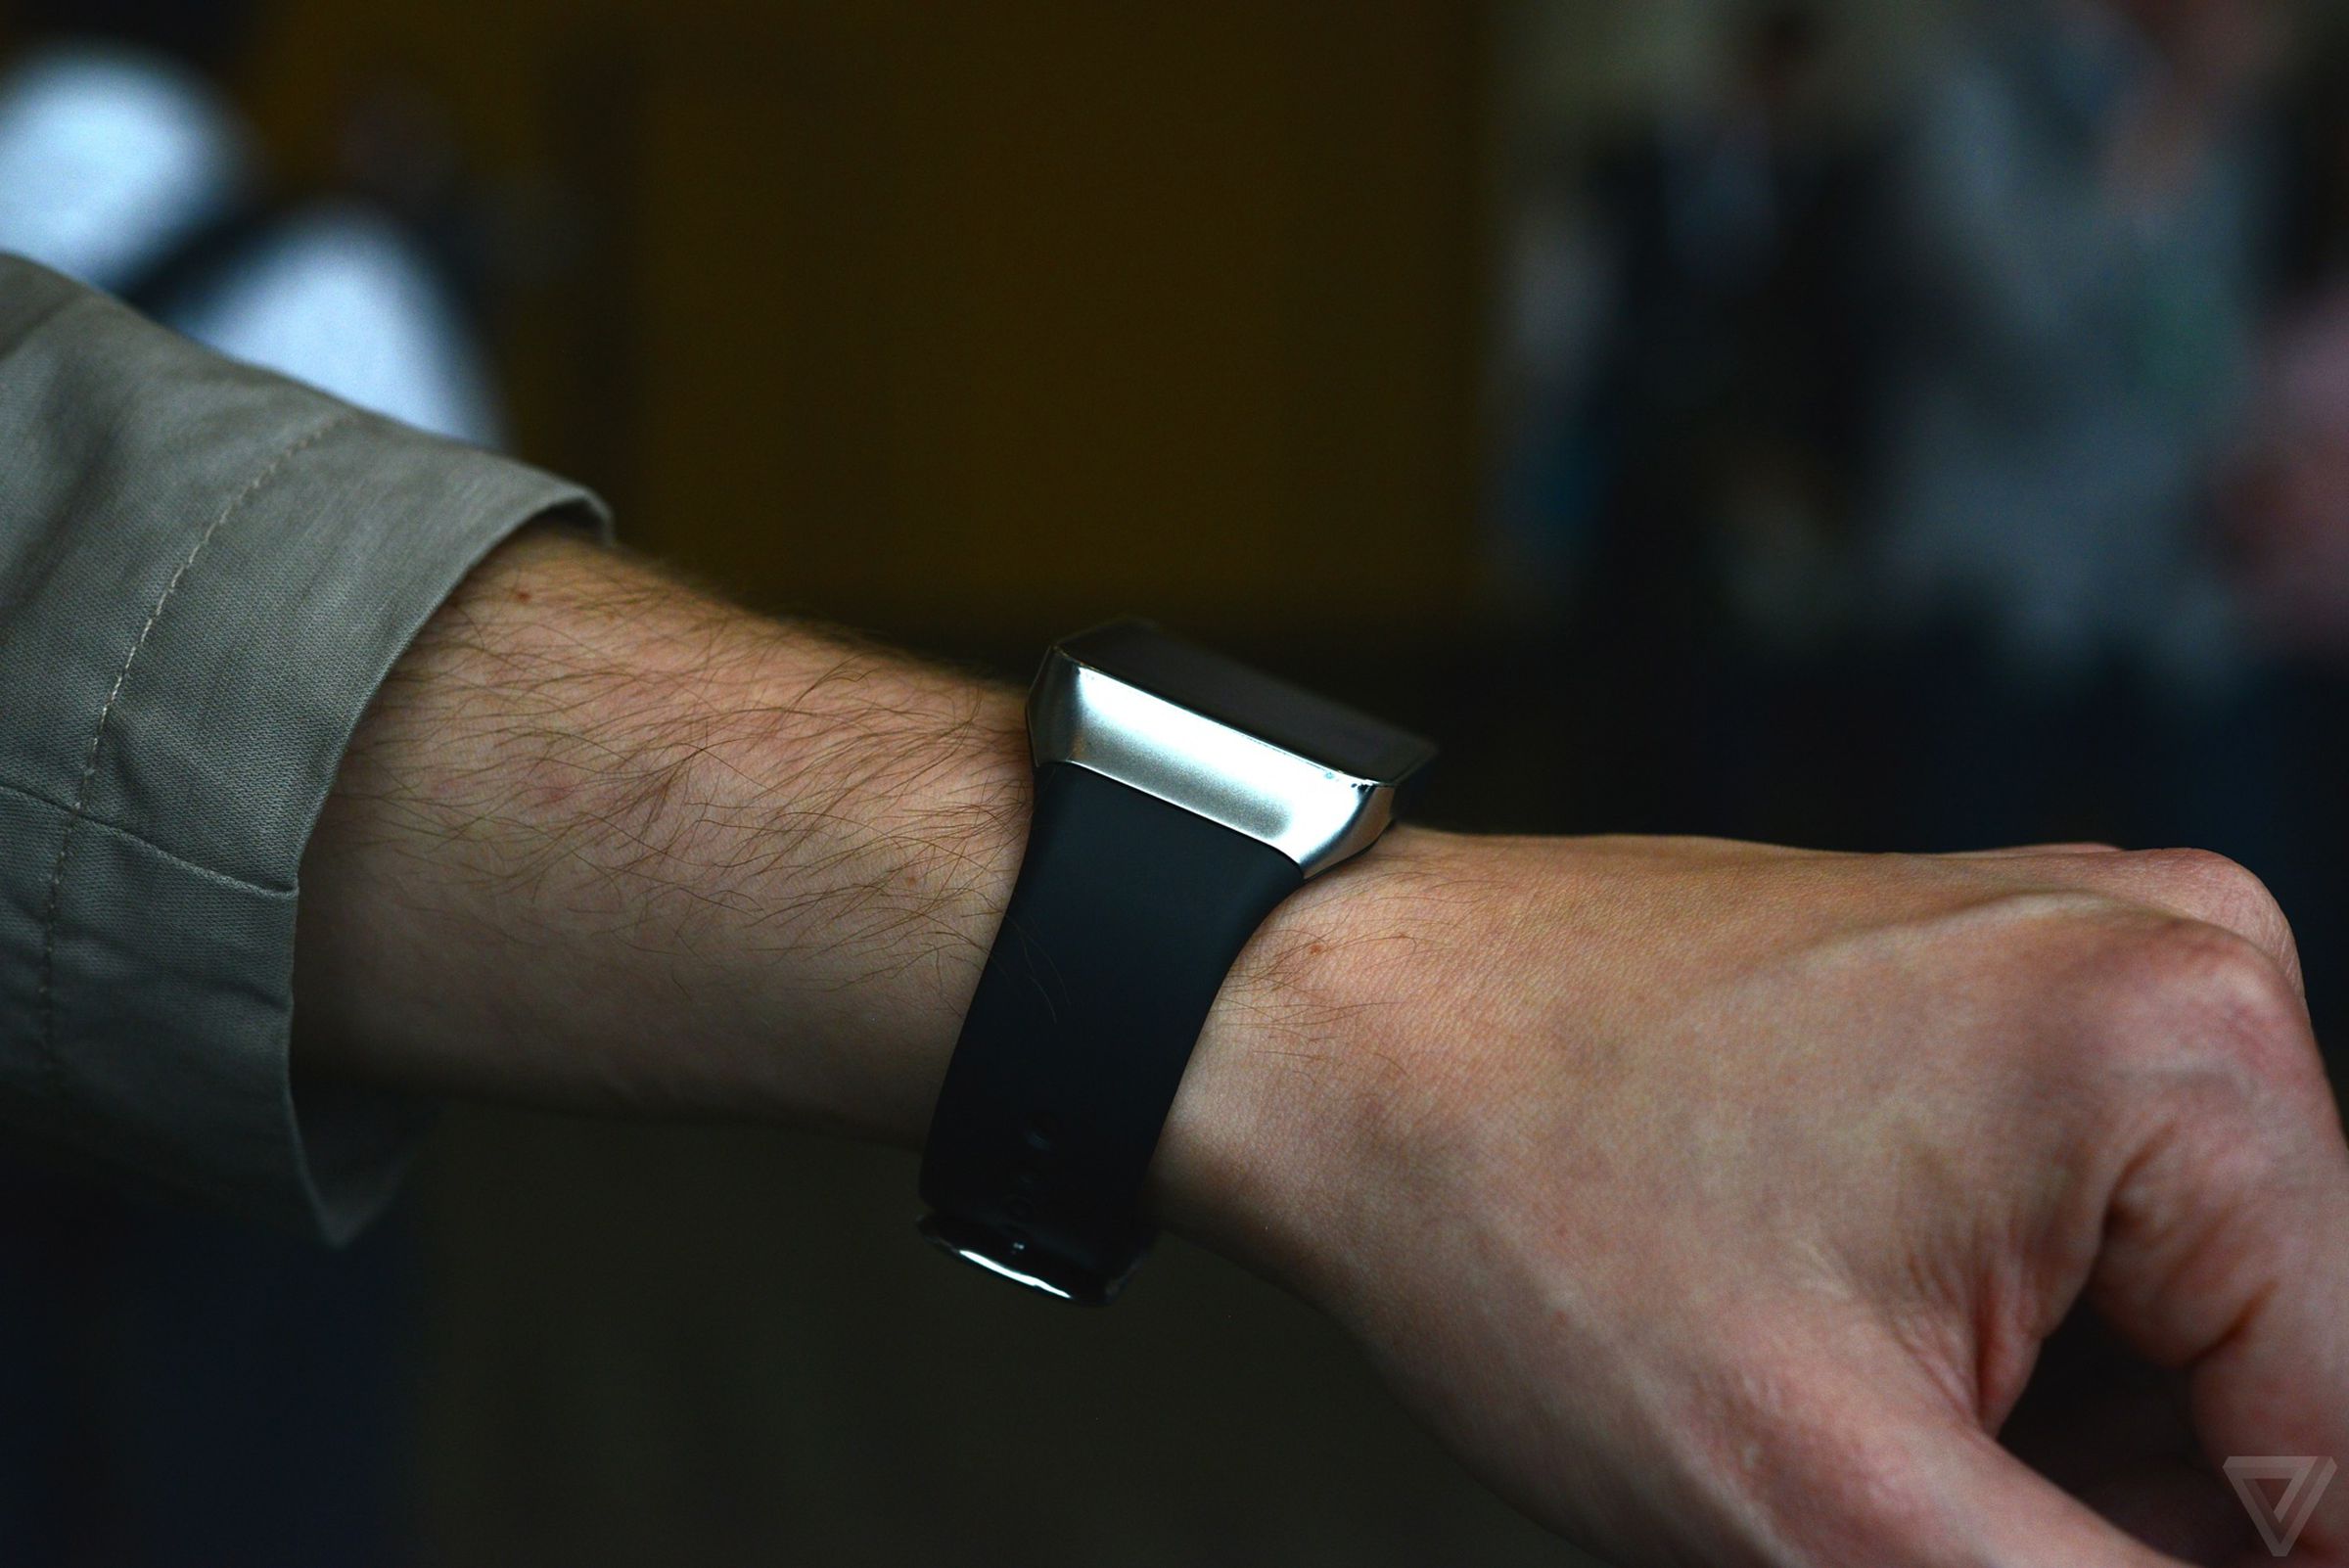 Samsung Gear Live hands-on pictures